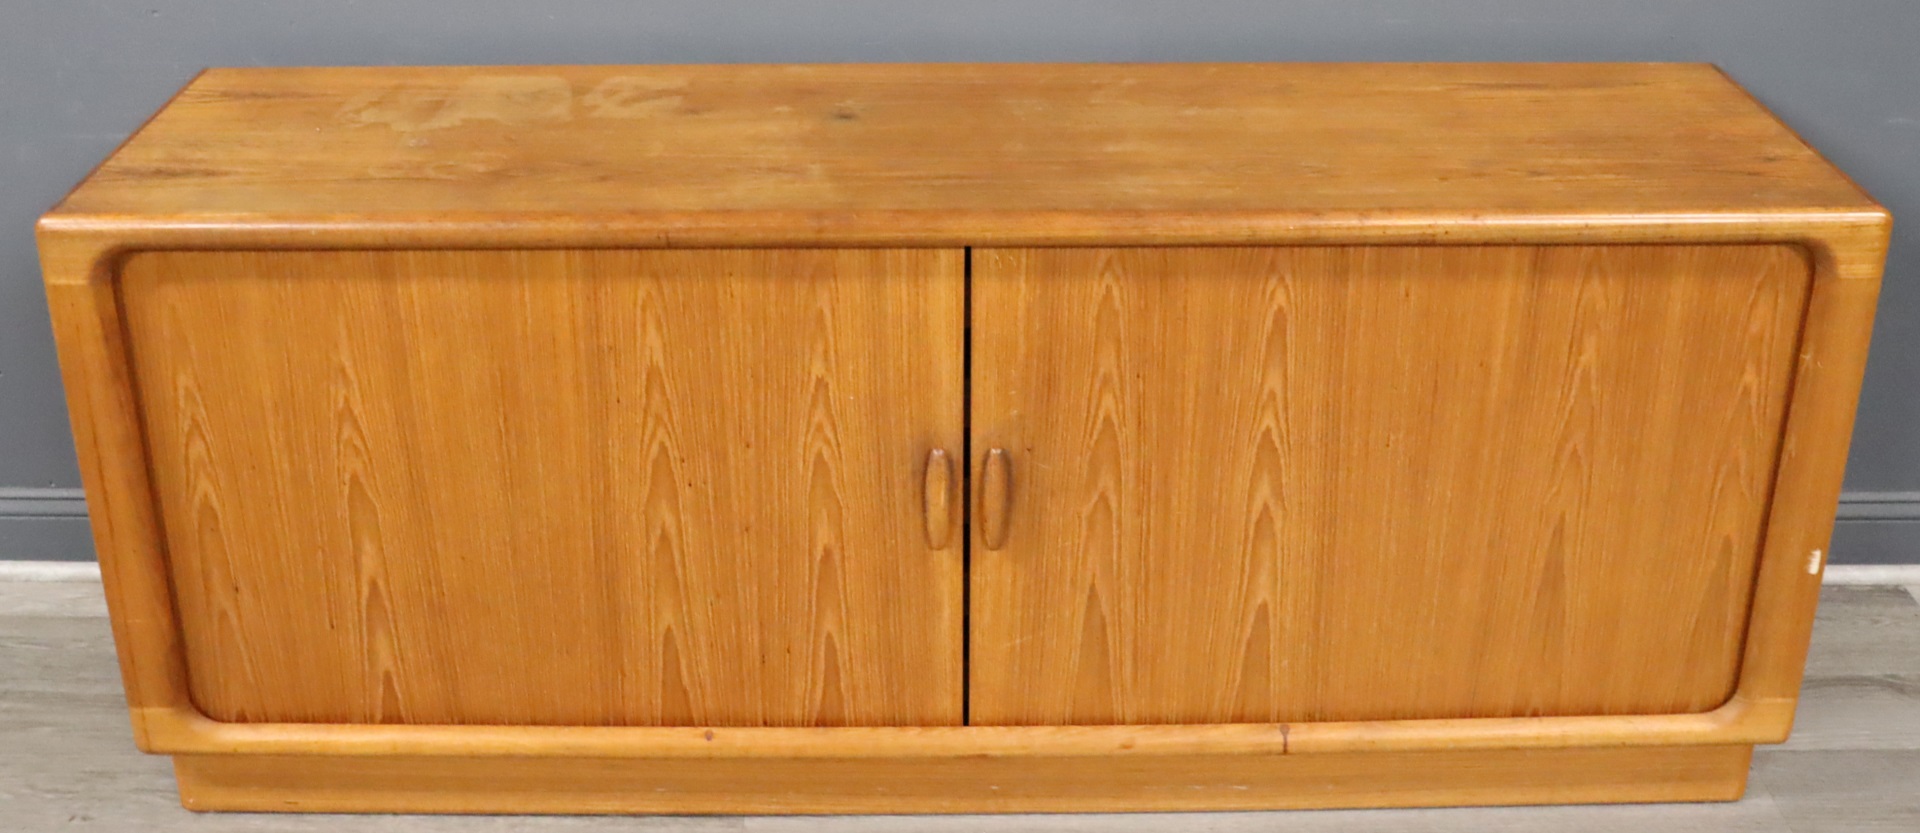 MIDCENTURY TAMBOUR FRONT CABINET 3be994